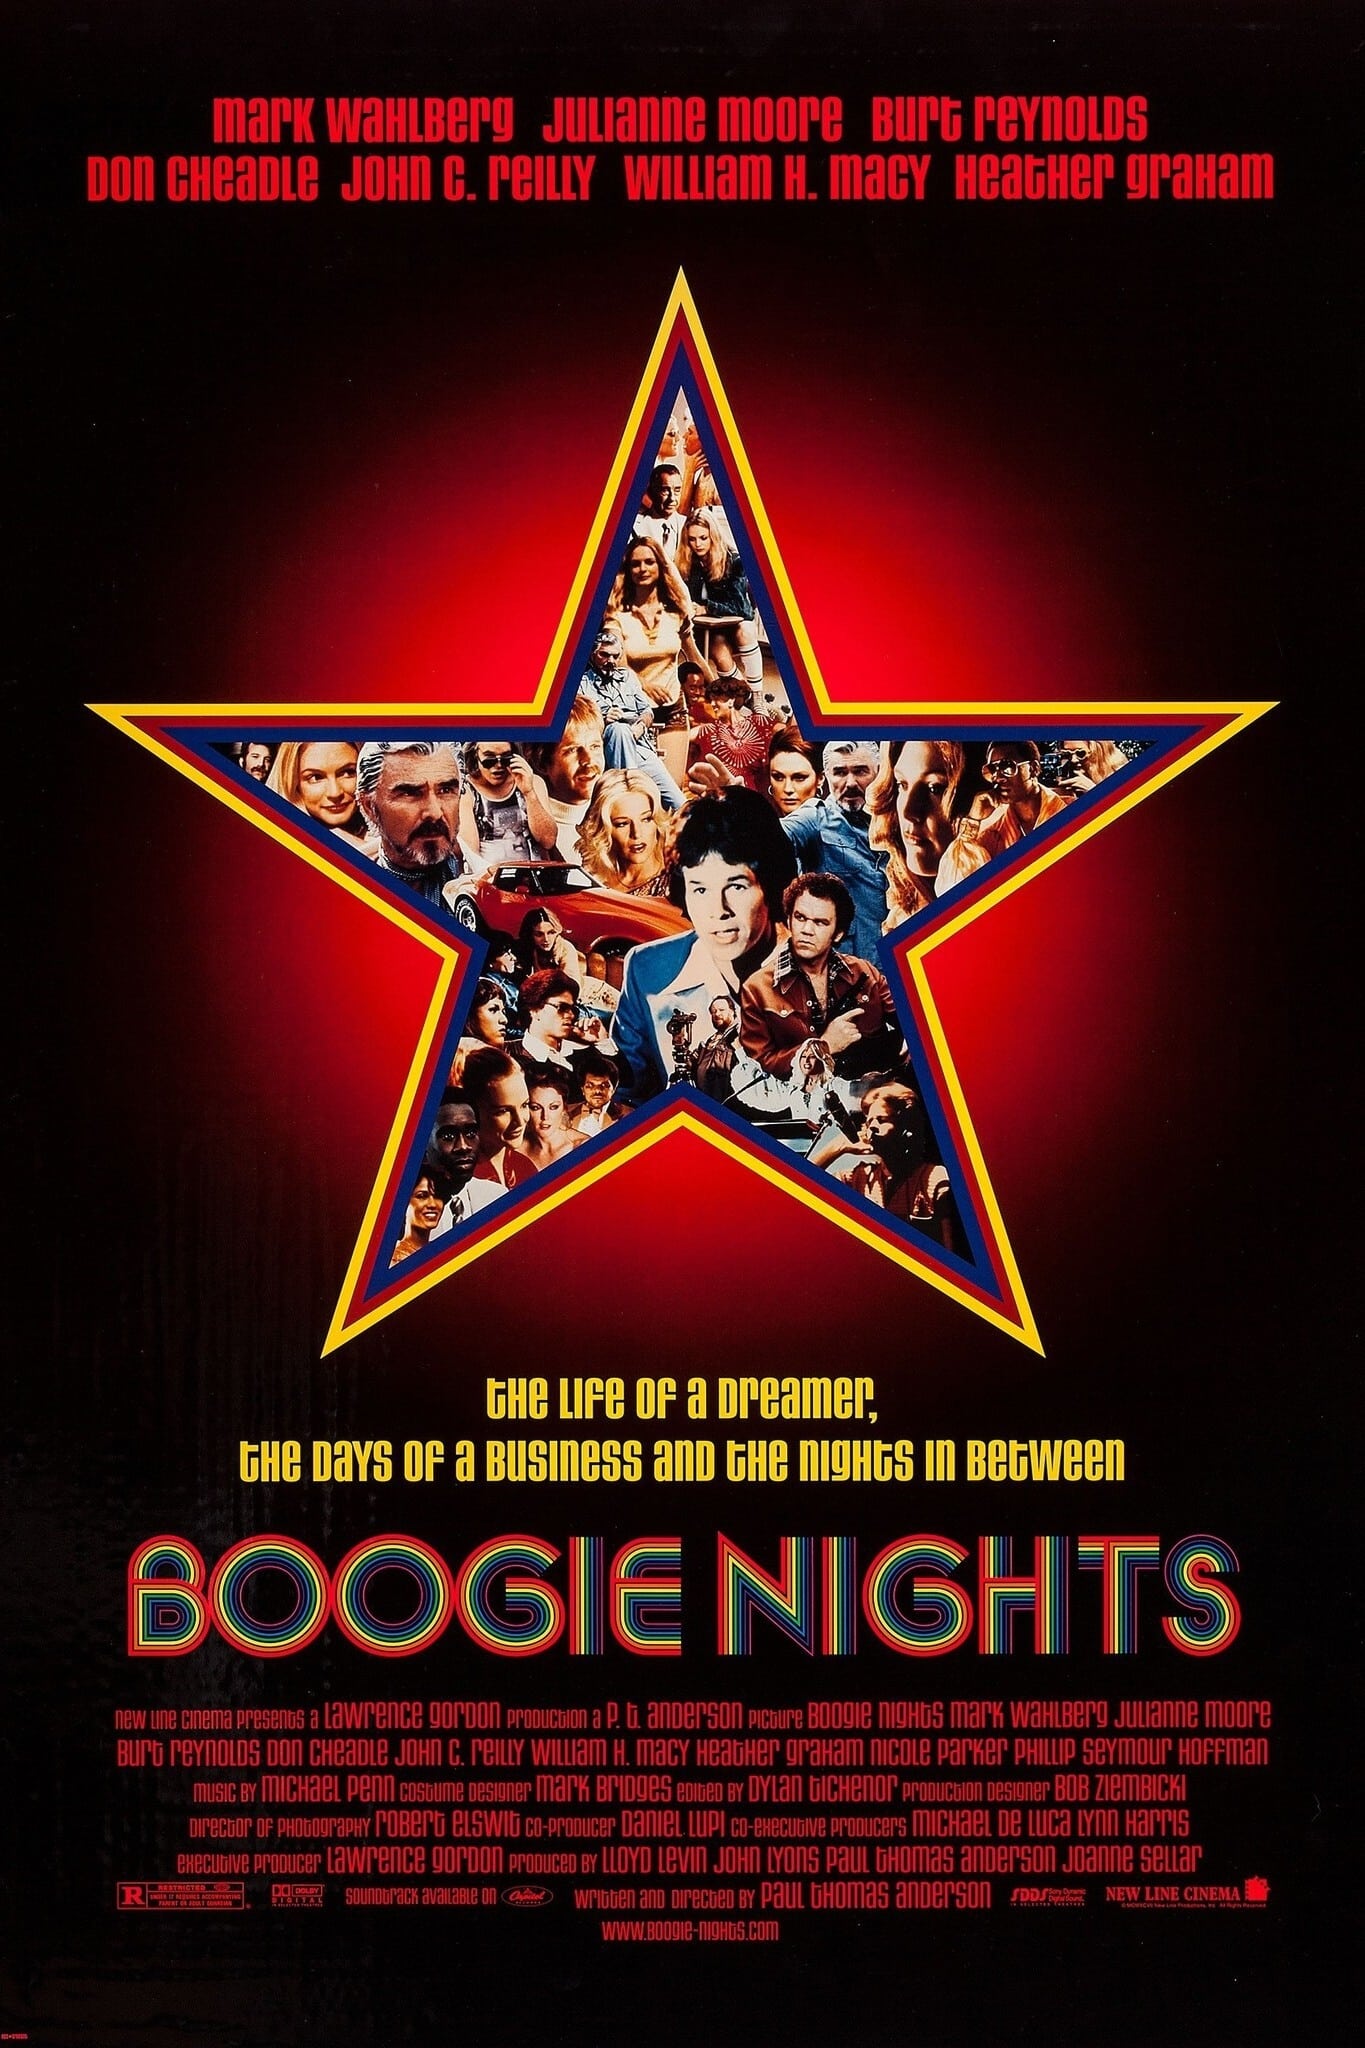 The original poster artwork for ‘Boogie Nights’